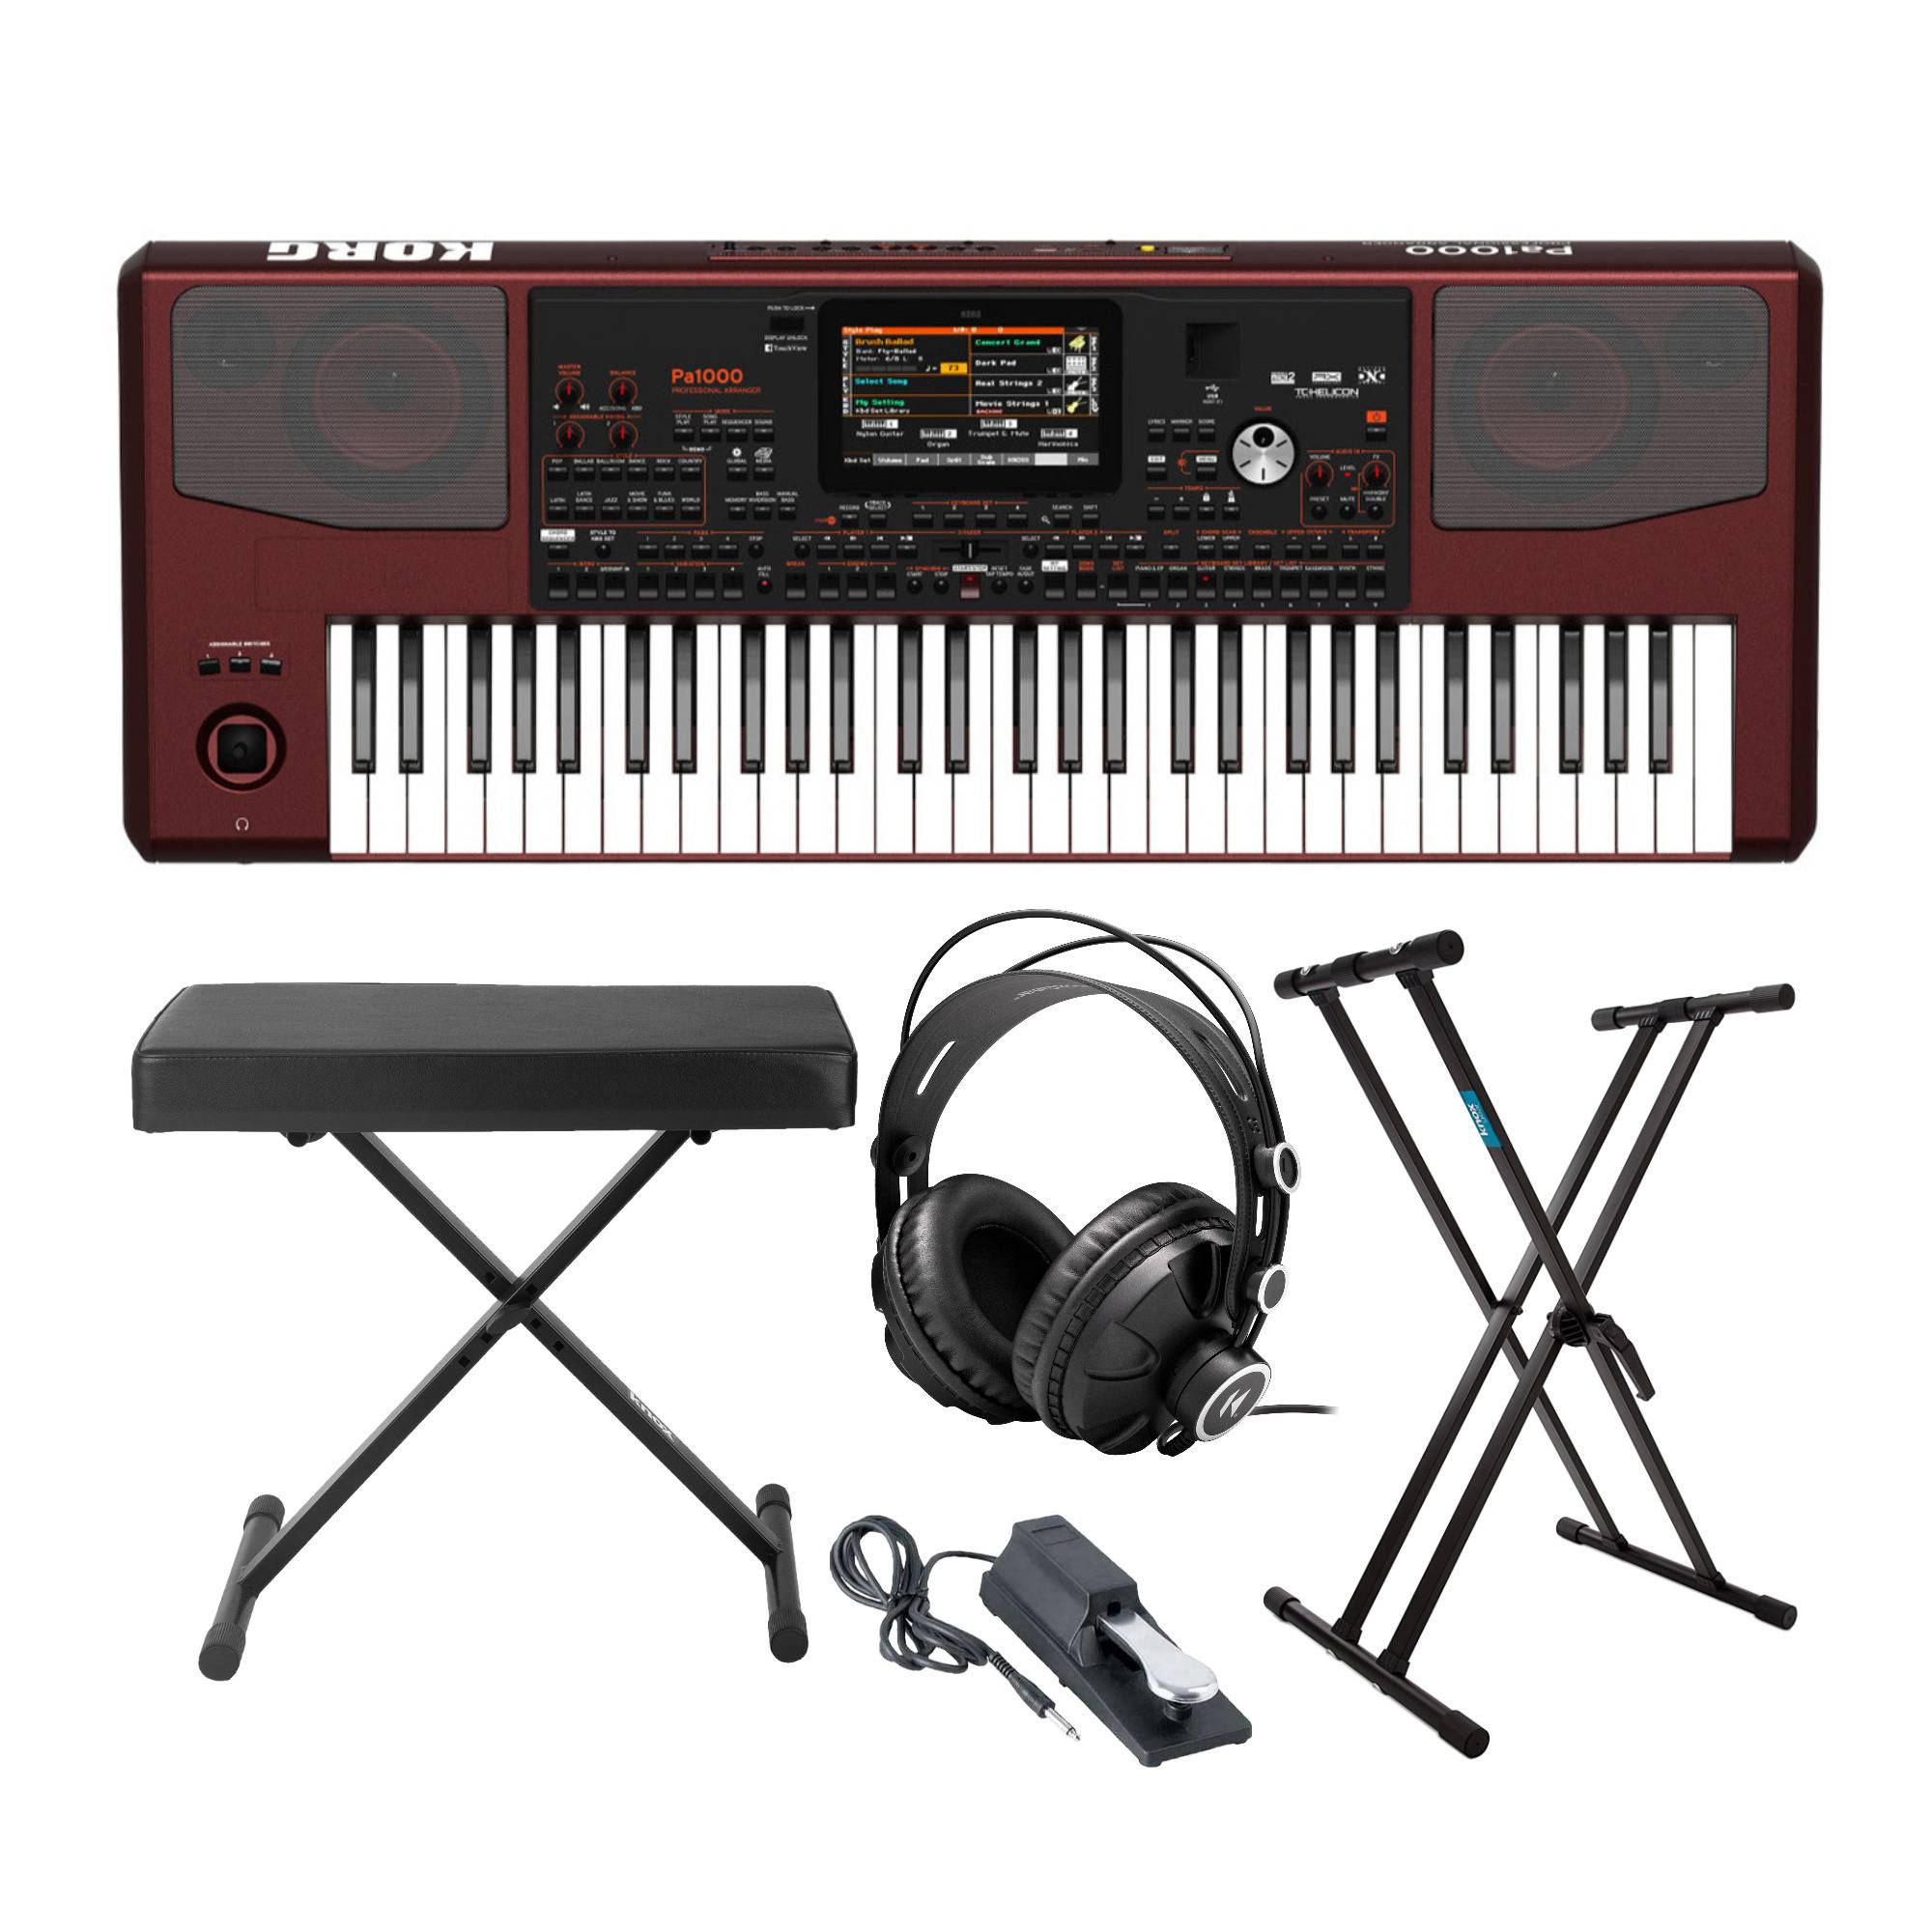 Korg PA1000 Arranger Keyboard with Bench and Stand Accessory Bundle